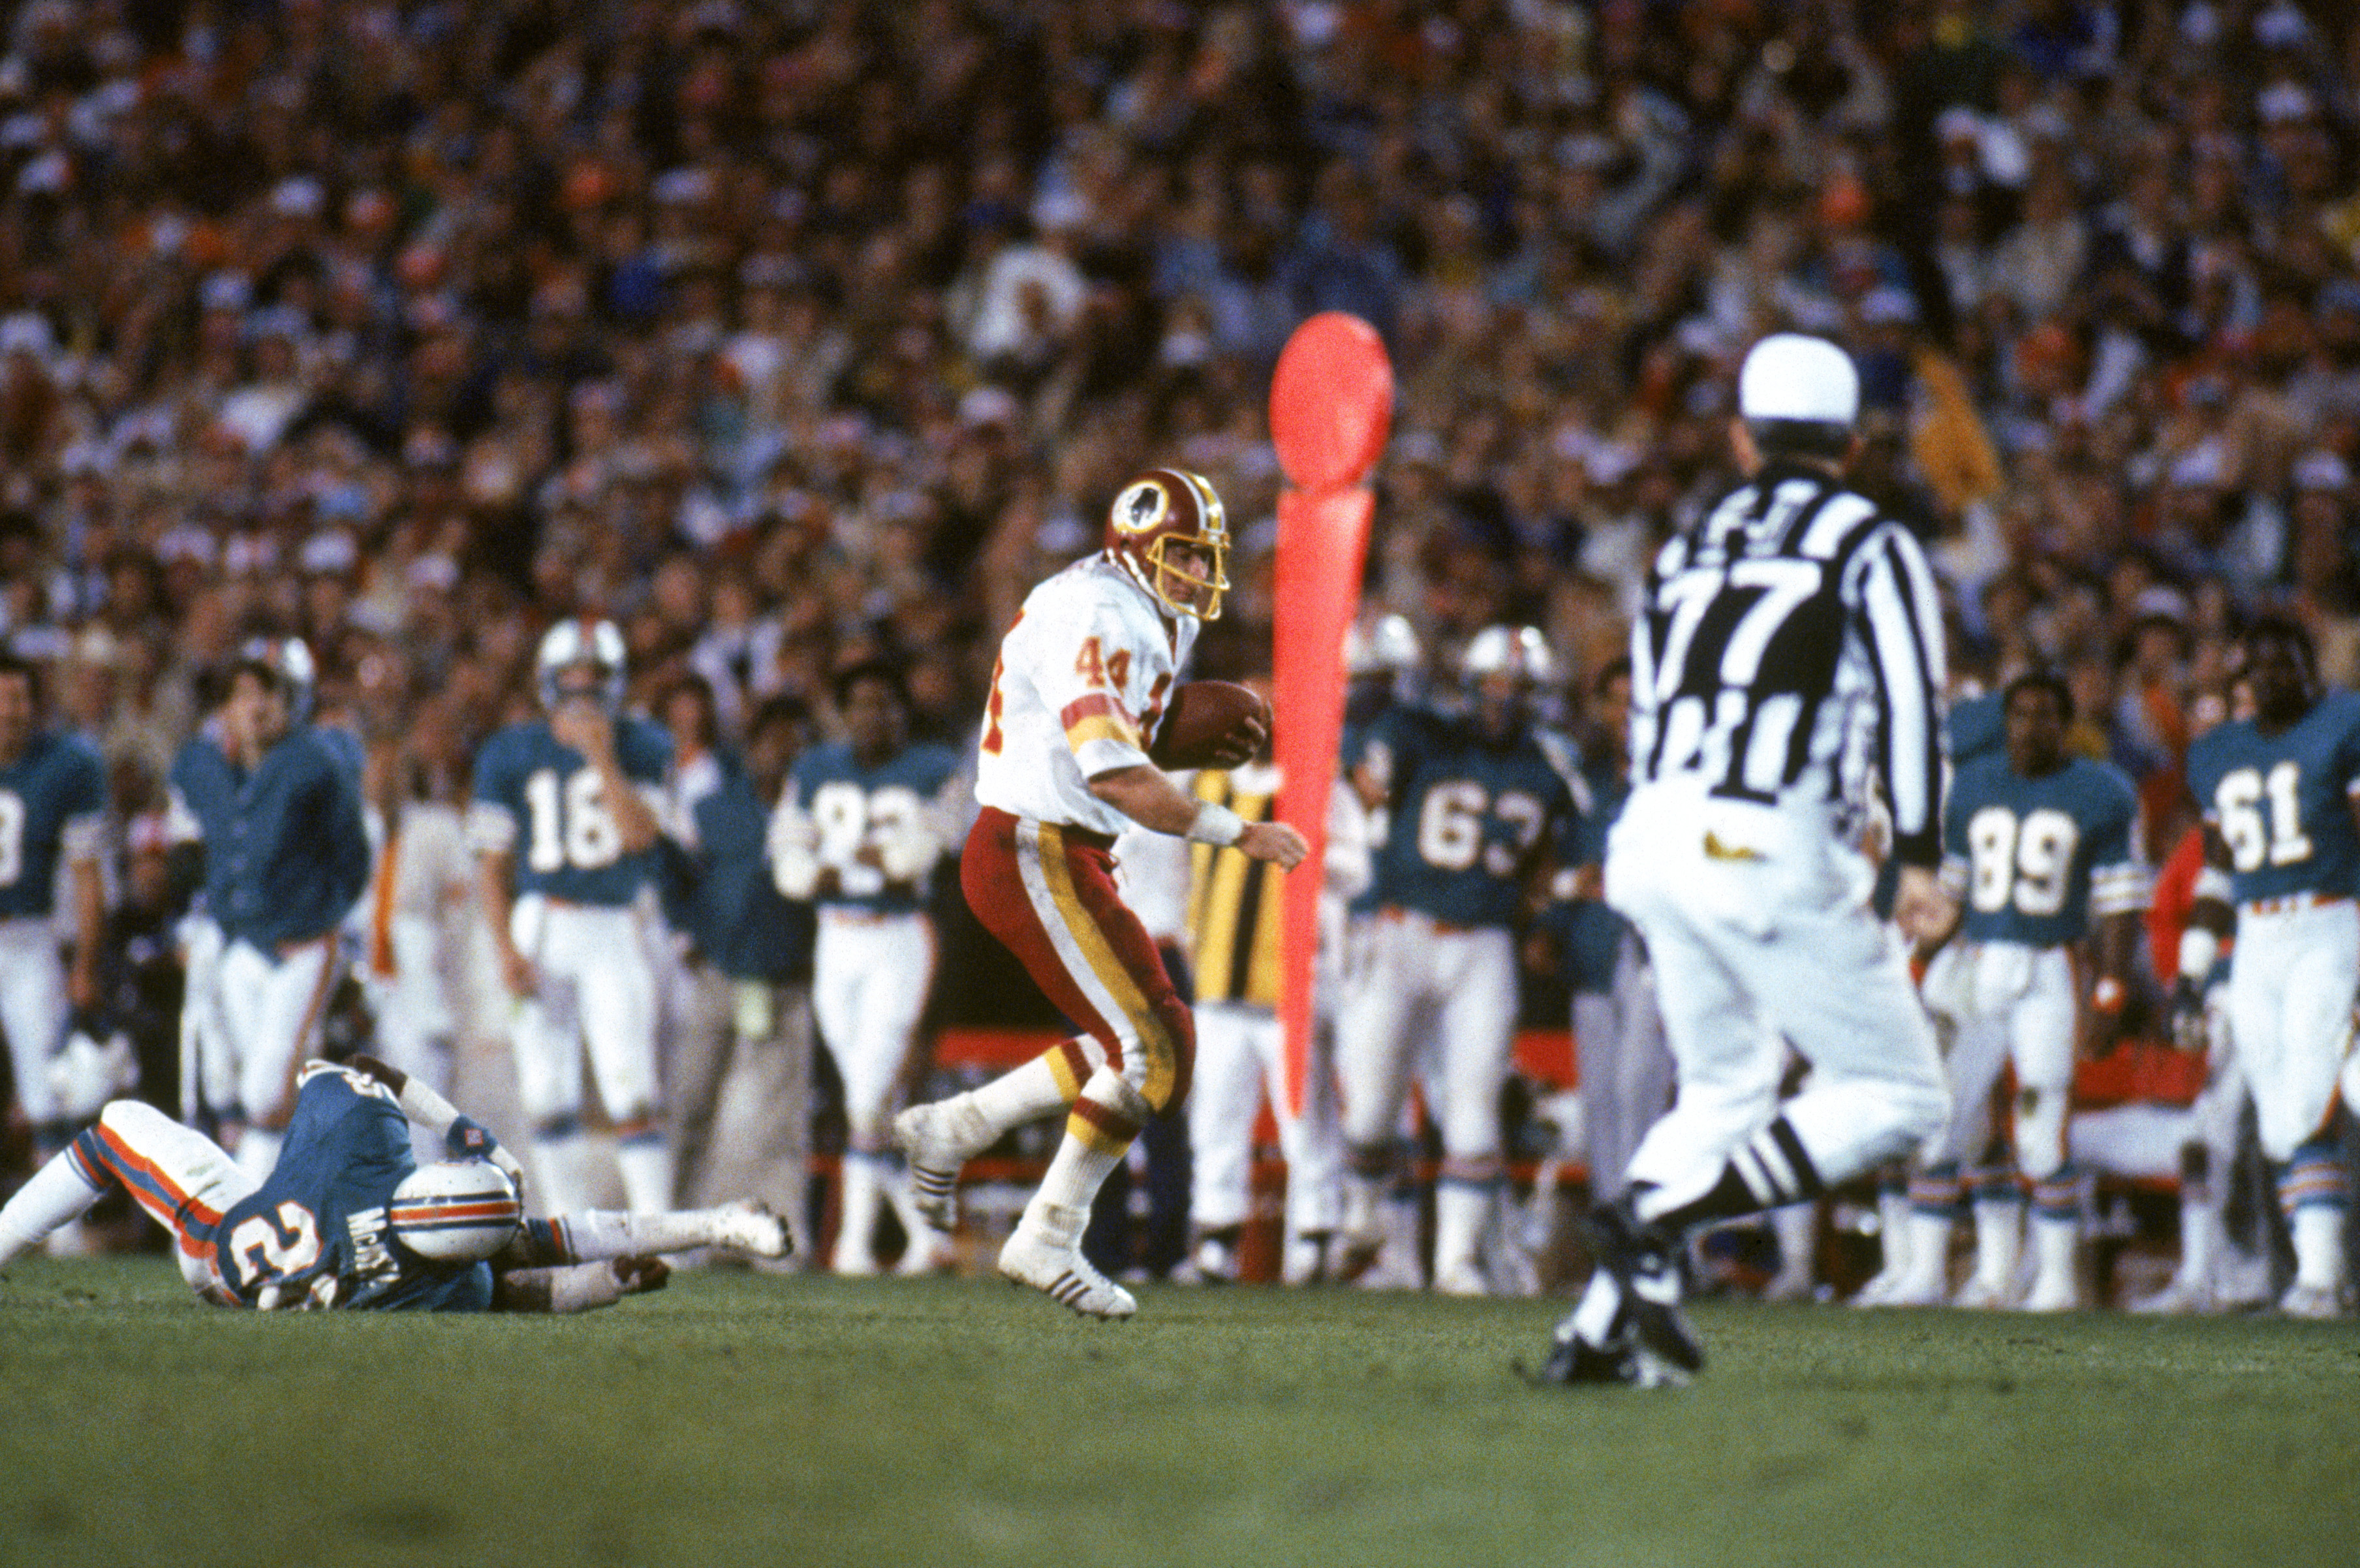 PASADENA, CA - JANUARY 30:  Running back John Riggins #44 of the Washington Redskins rushes for yards during Super Bowl XVII against the Miami Dolphins at the Rose Bowl on January 30, 1983 in Pasadena, California.  John Riggins was named Super Bowl MVP as